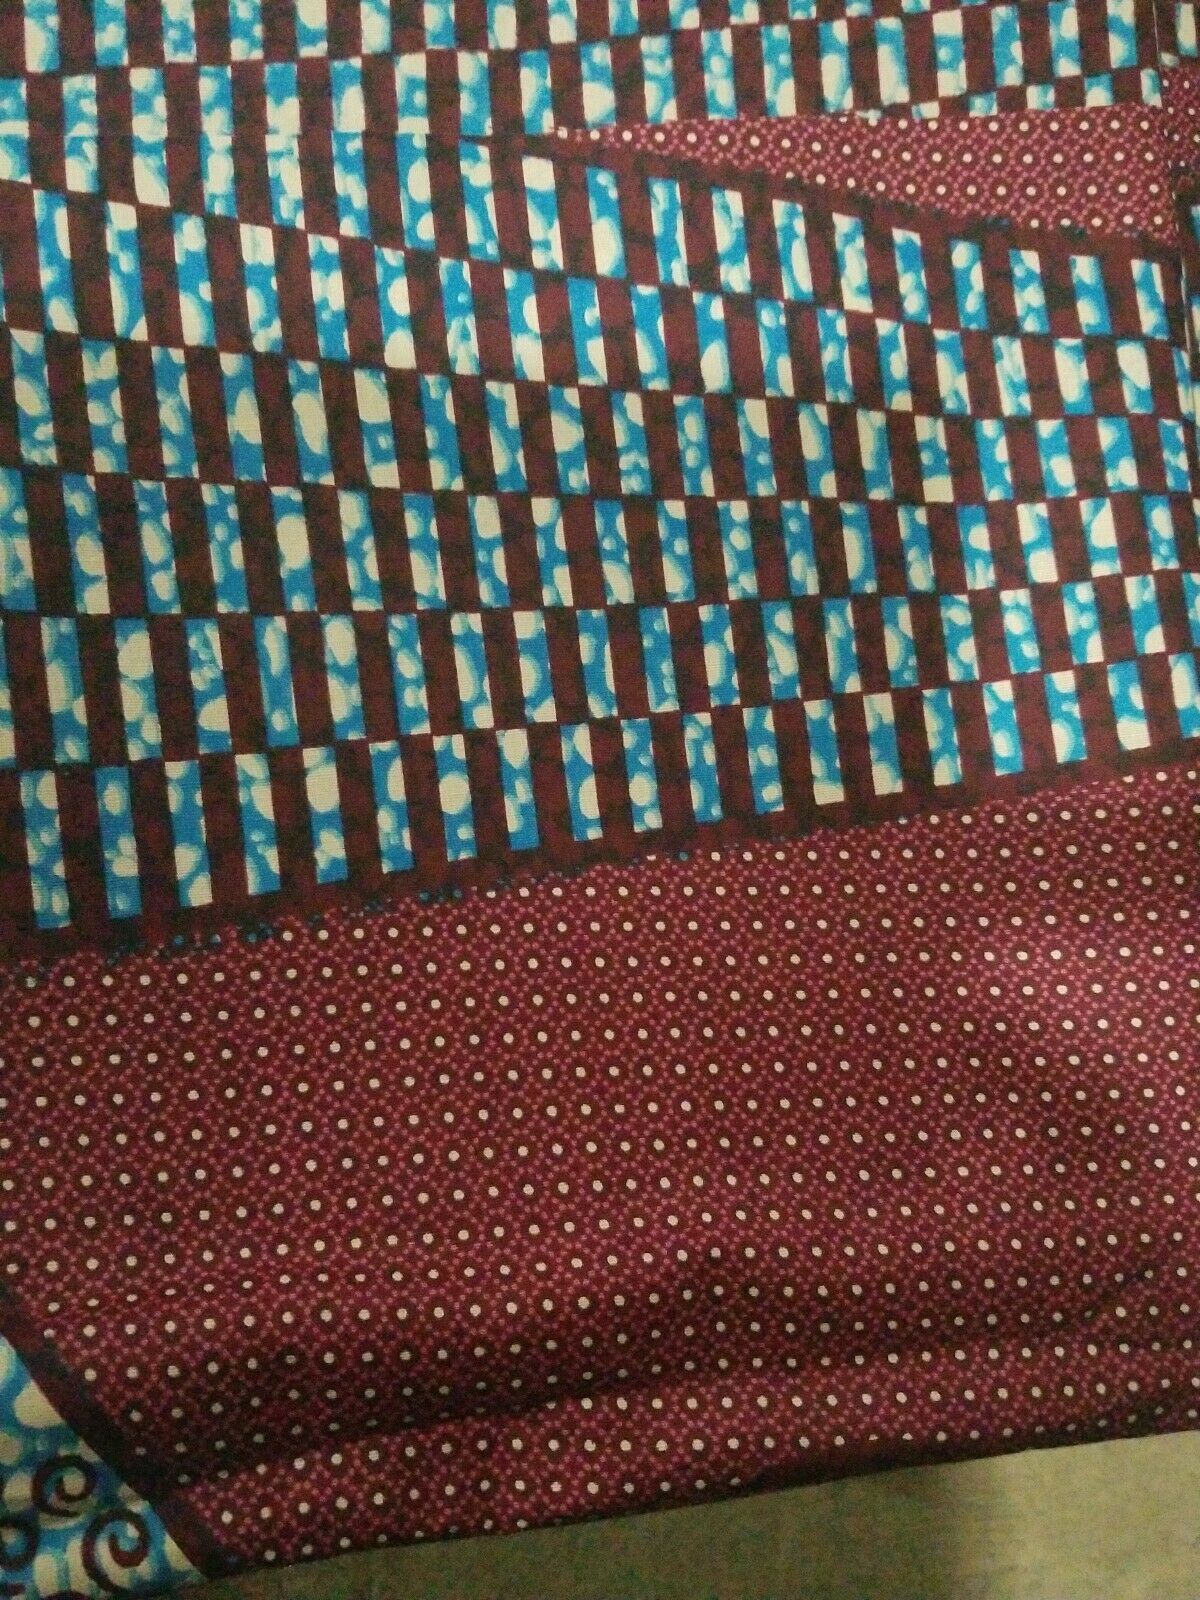 Brown MultiAfrican Print 100% Cotton Fabric ~1YARDS×18"×46"$8.50